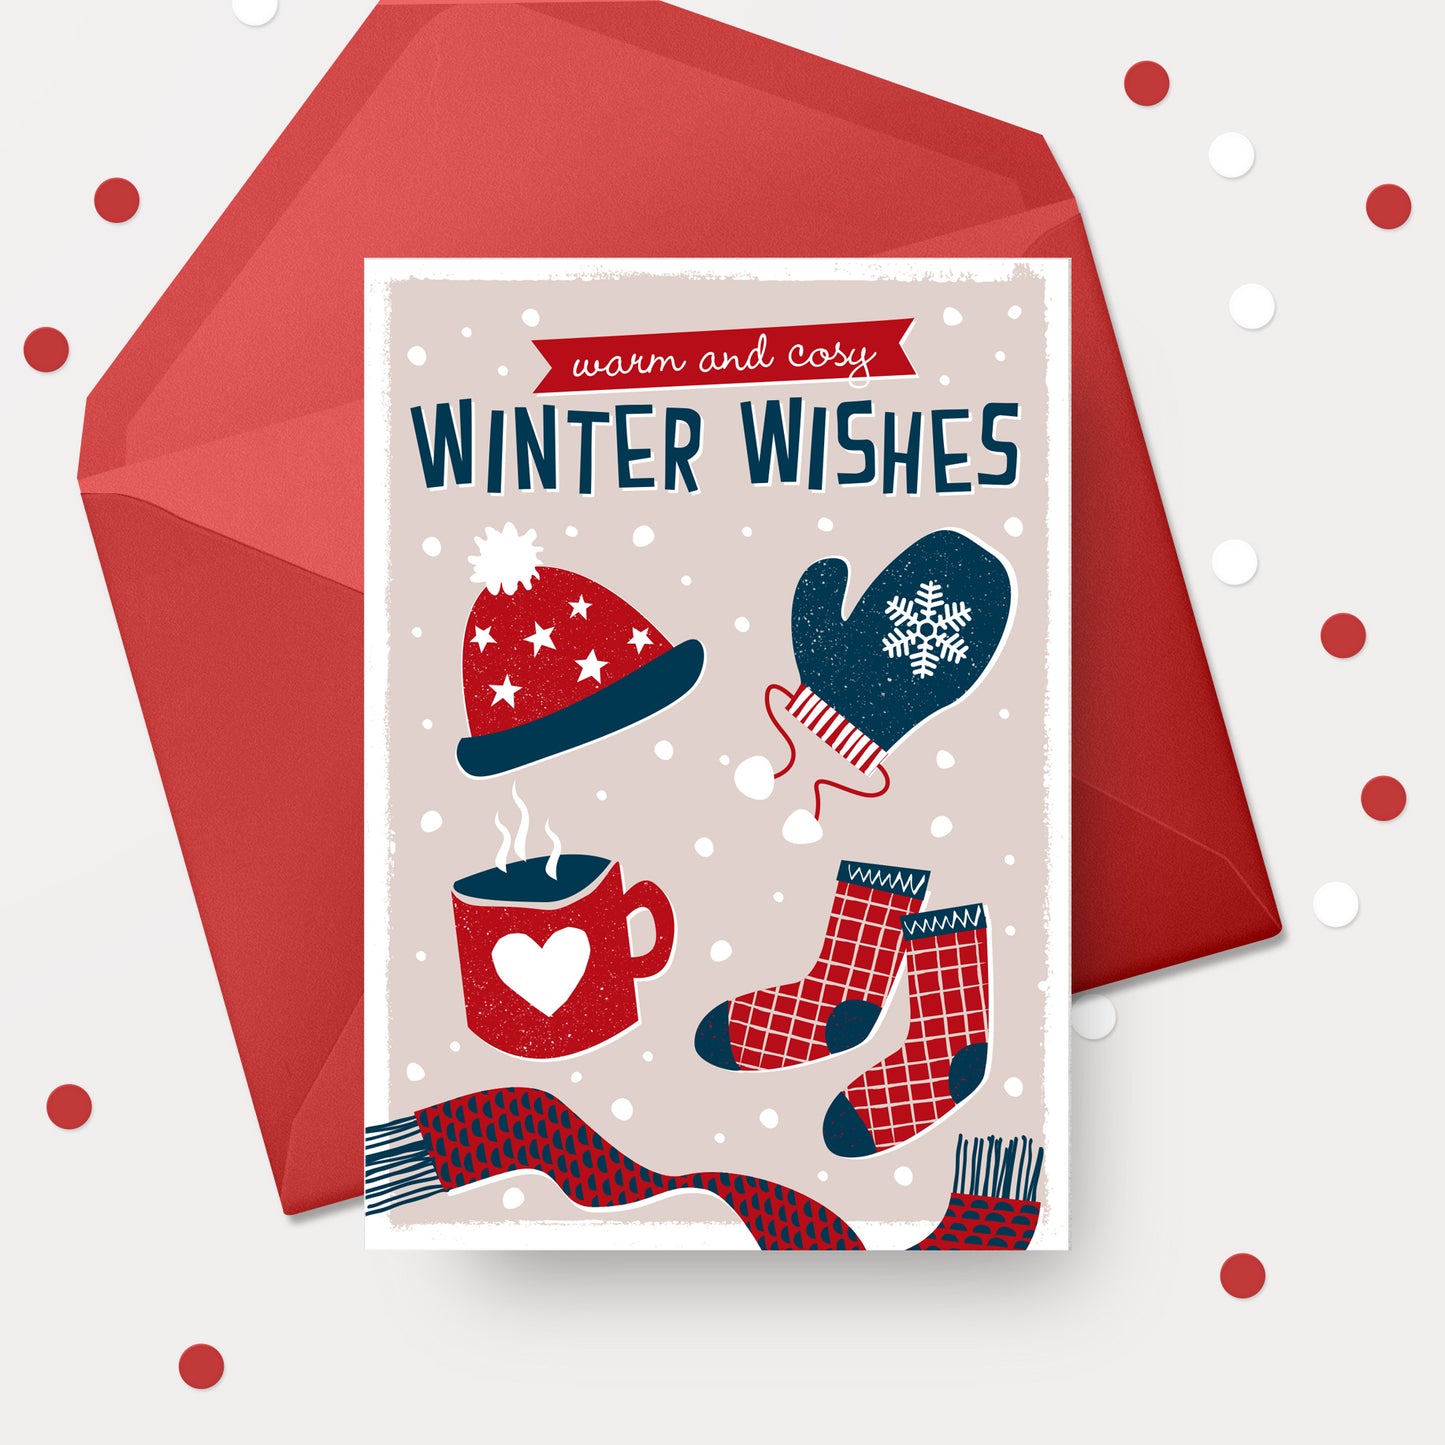 'Warm & cosy wishes' Christmas card